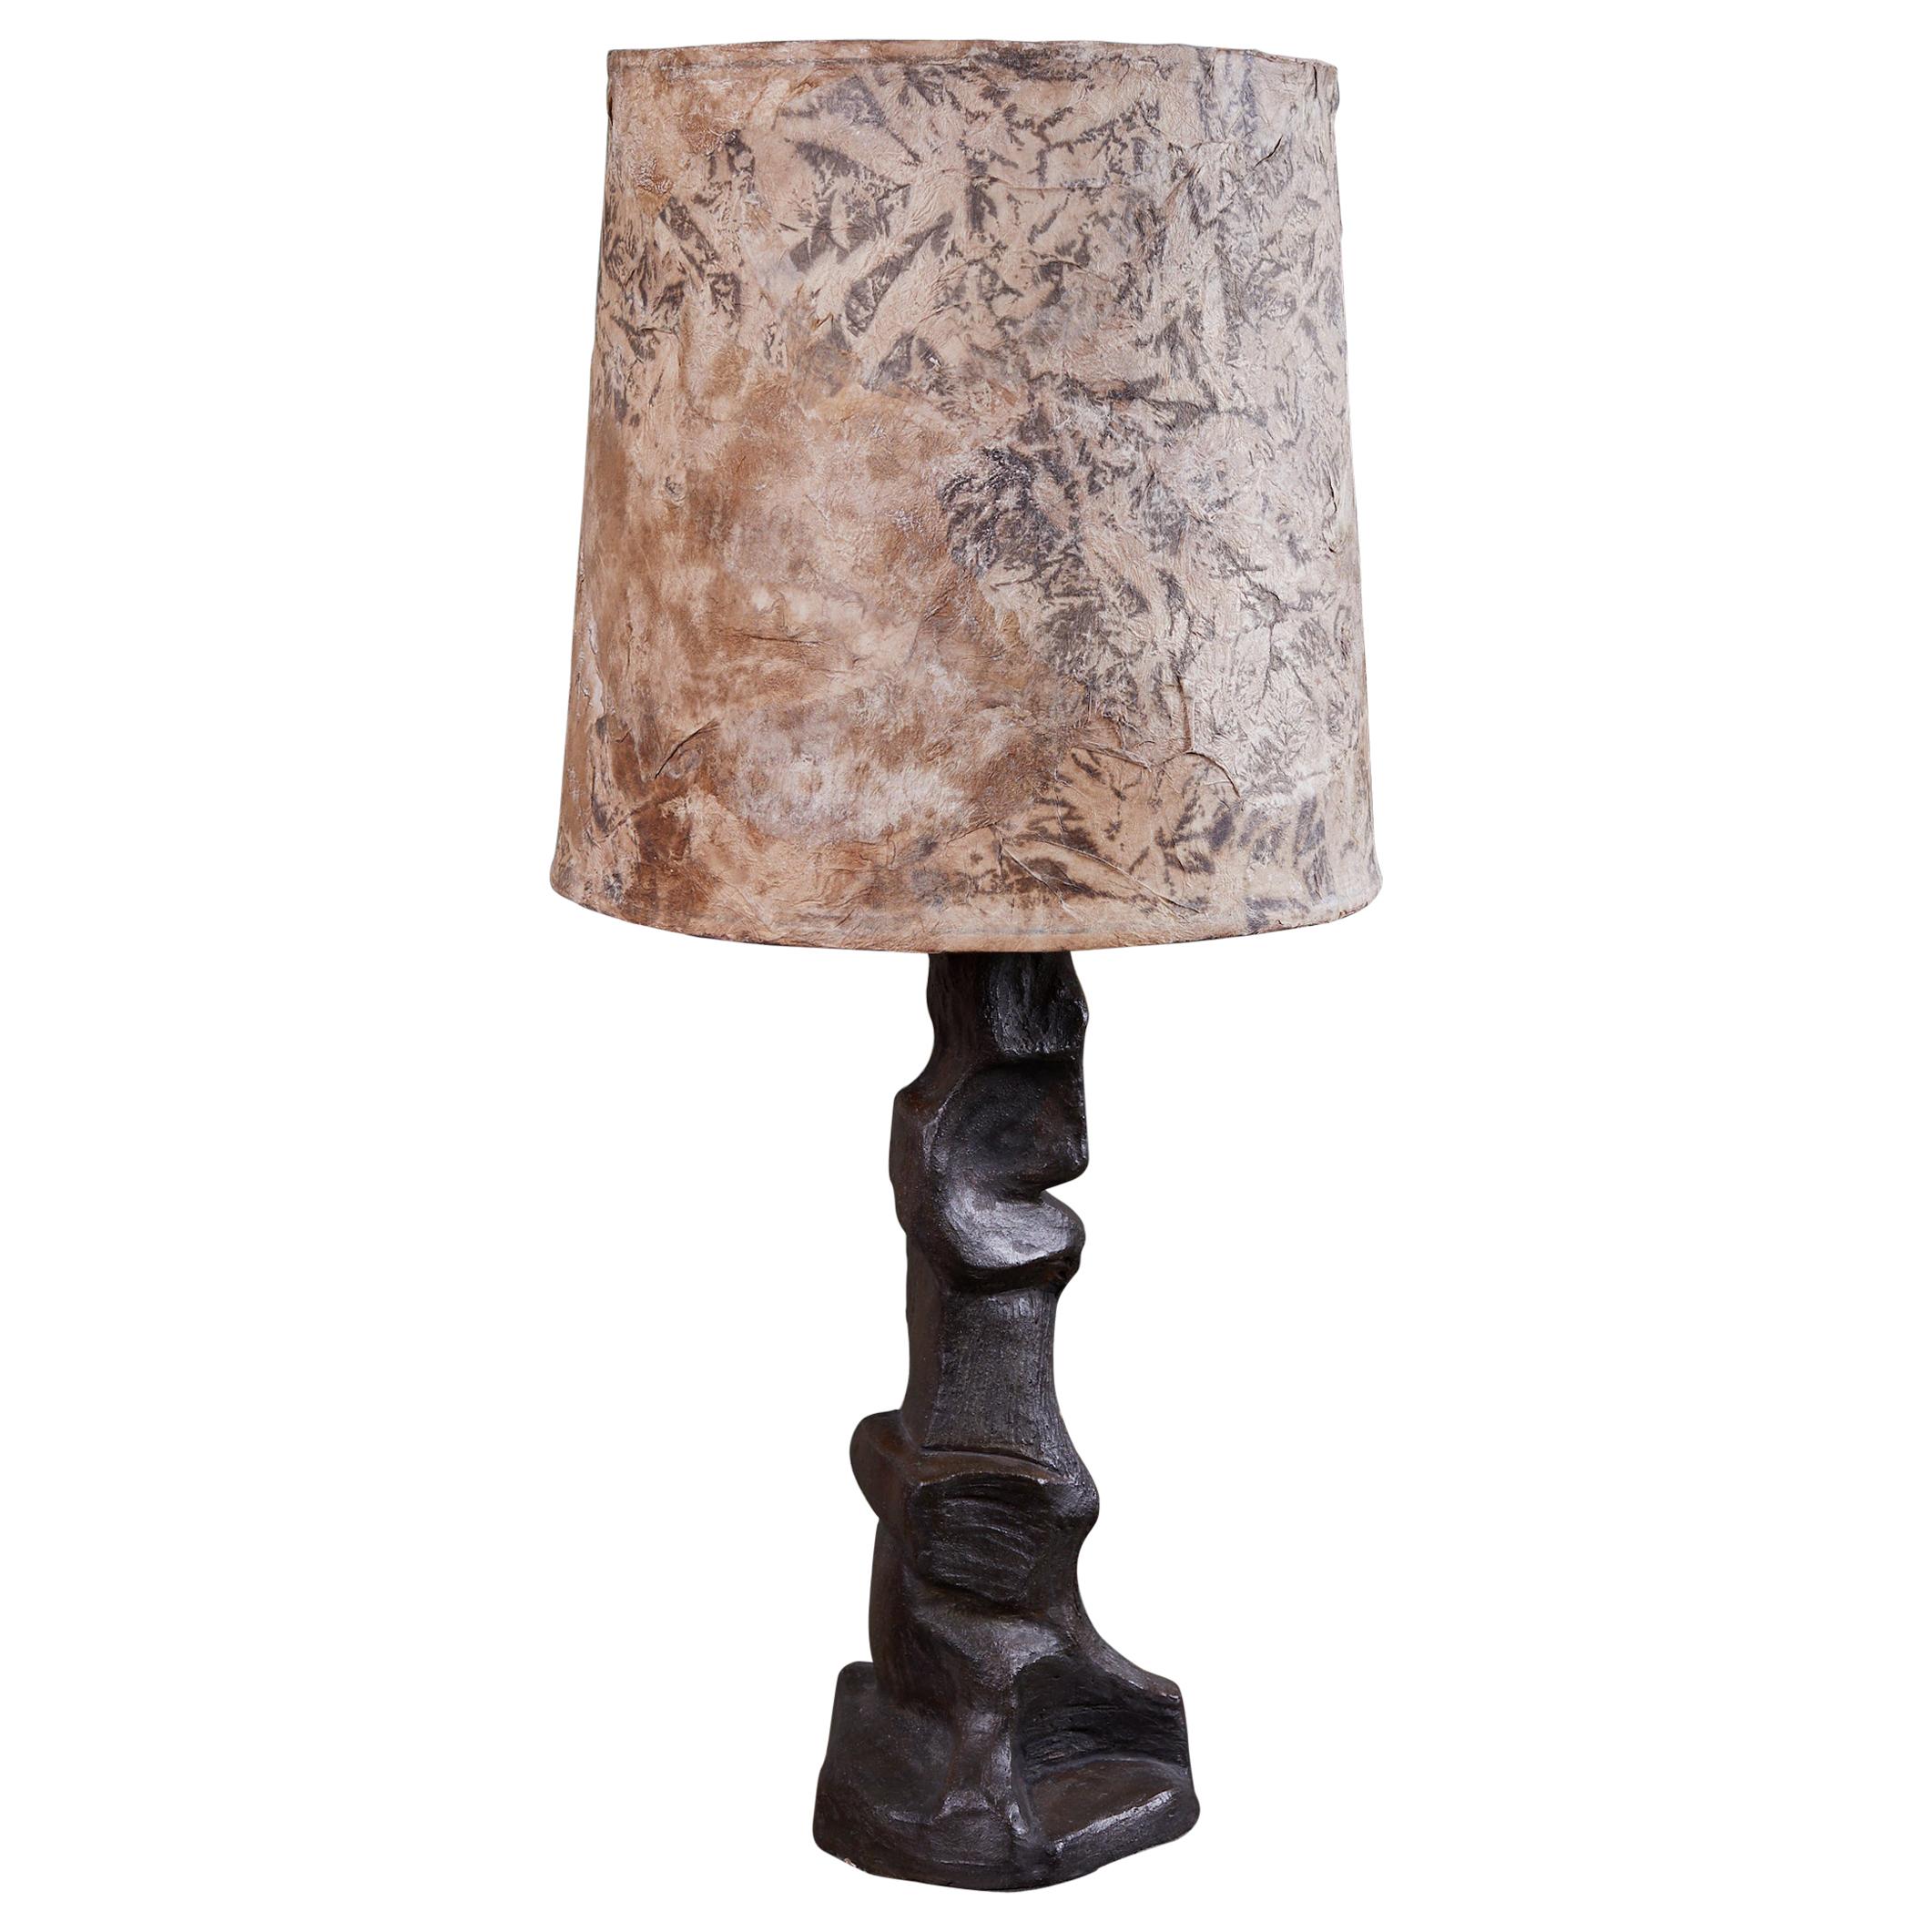 Brutalist Style Ceramic Table Lamp by Jeanine Trottier For Sale